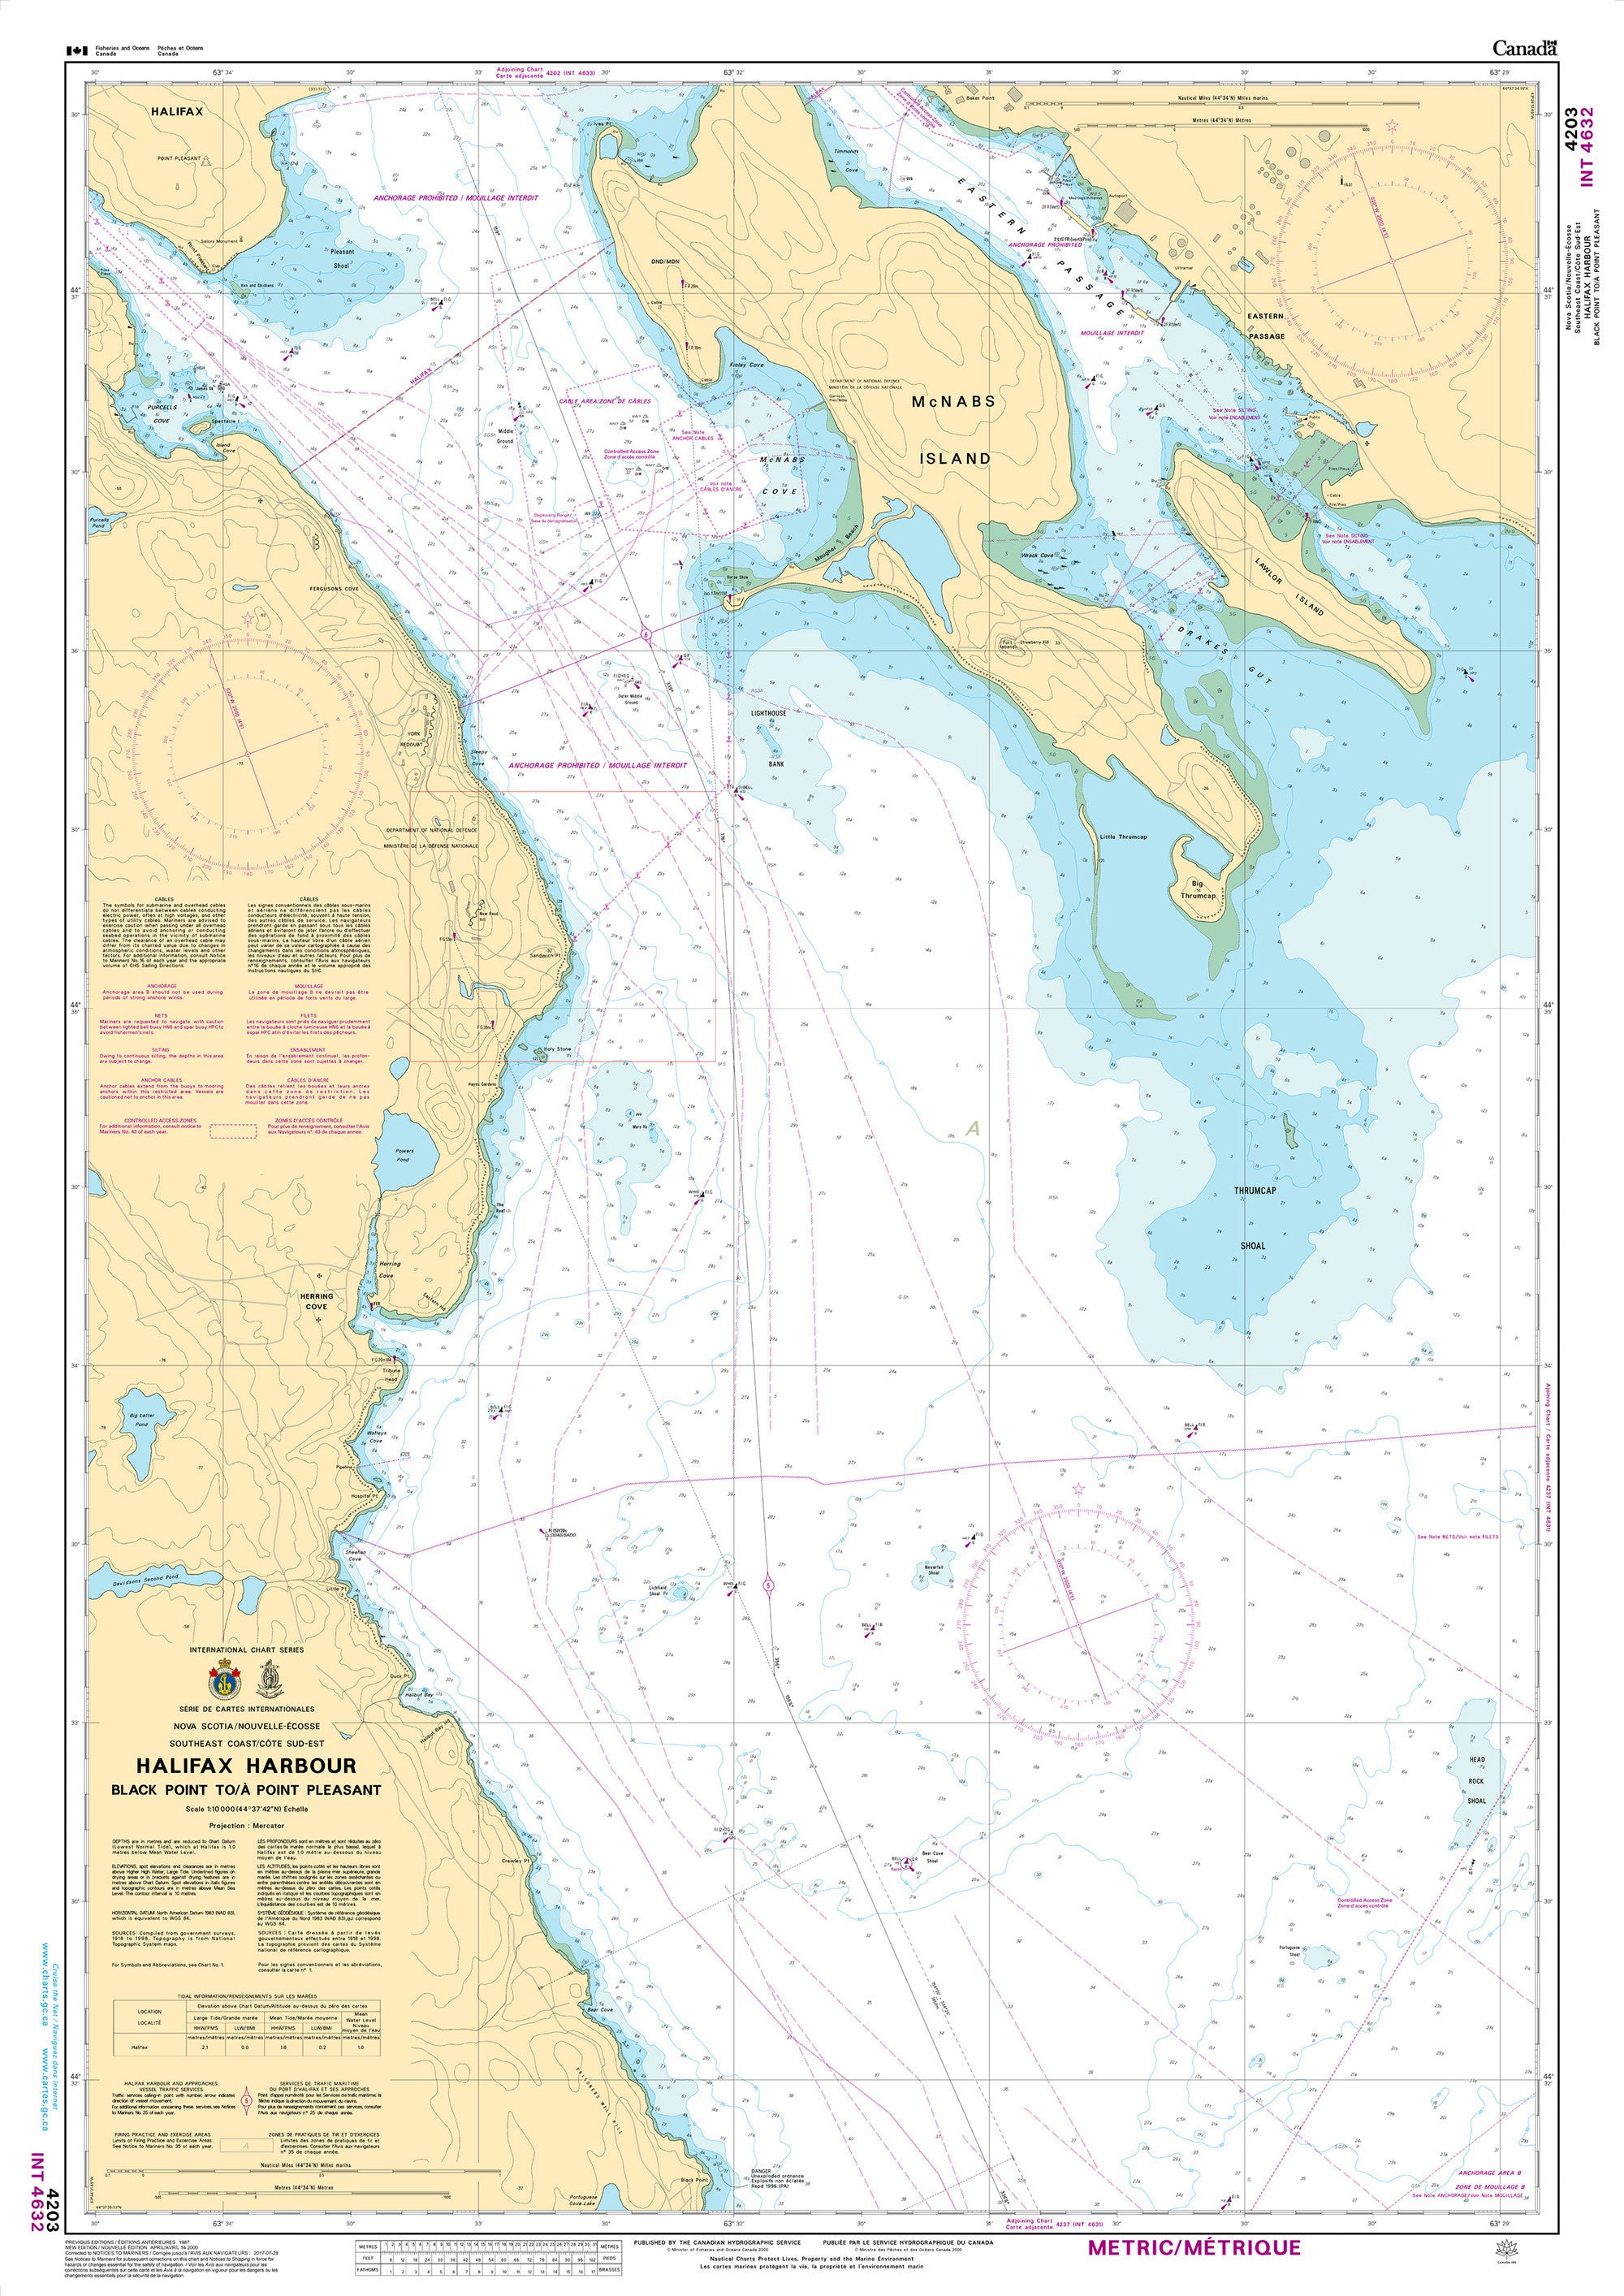 Canadian Hydrographic Service Nautical Chart CHS4203: Halifax Harbour - Black Point to/à Point Pleasant